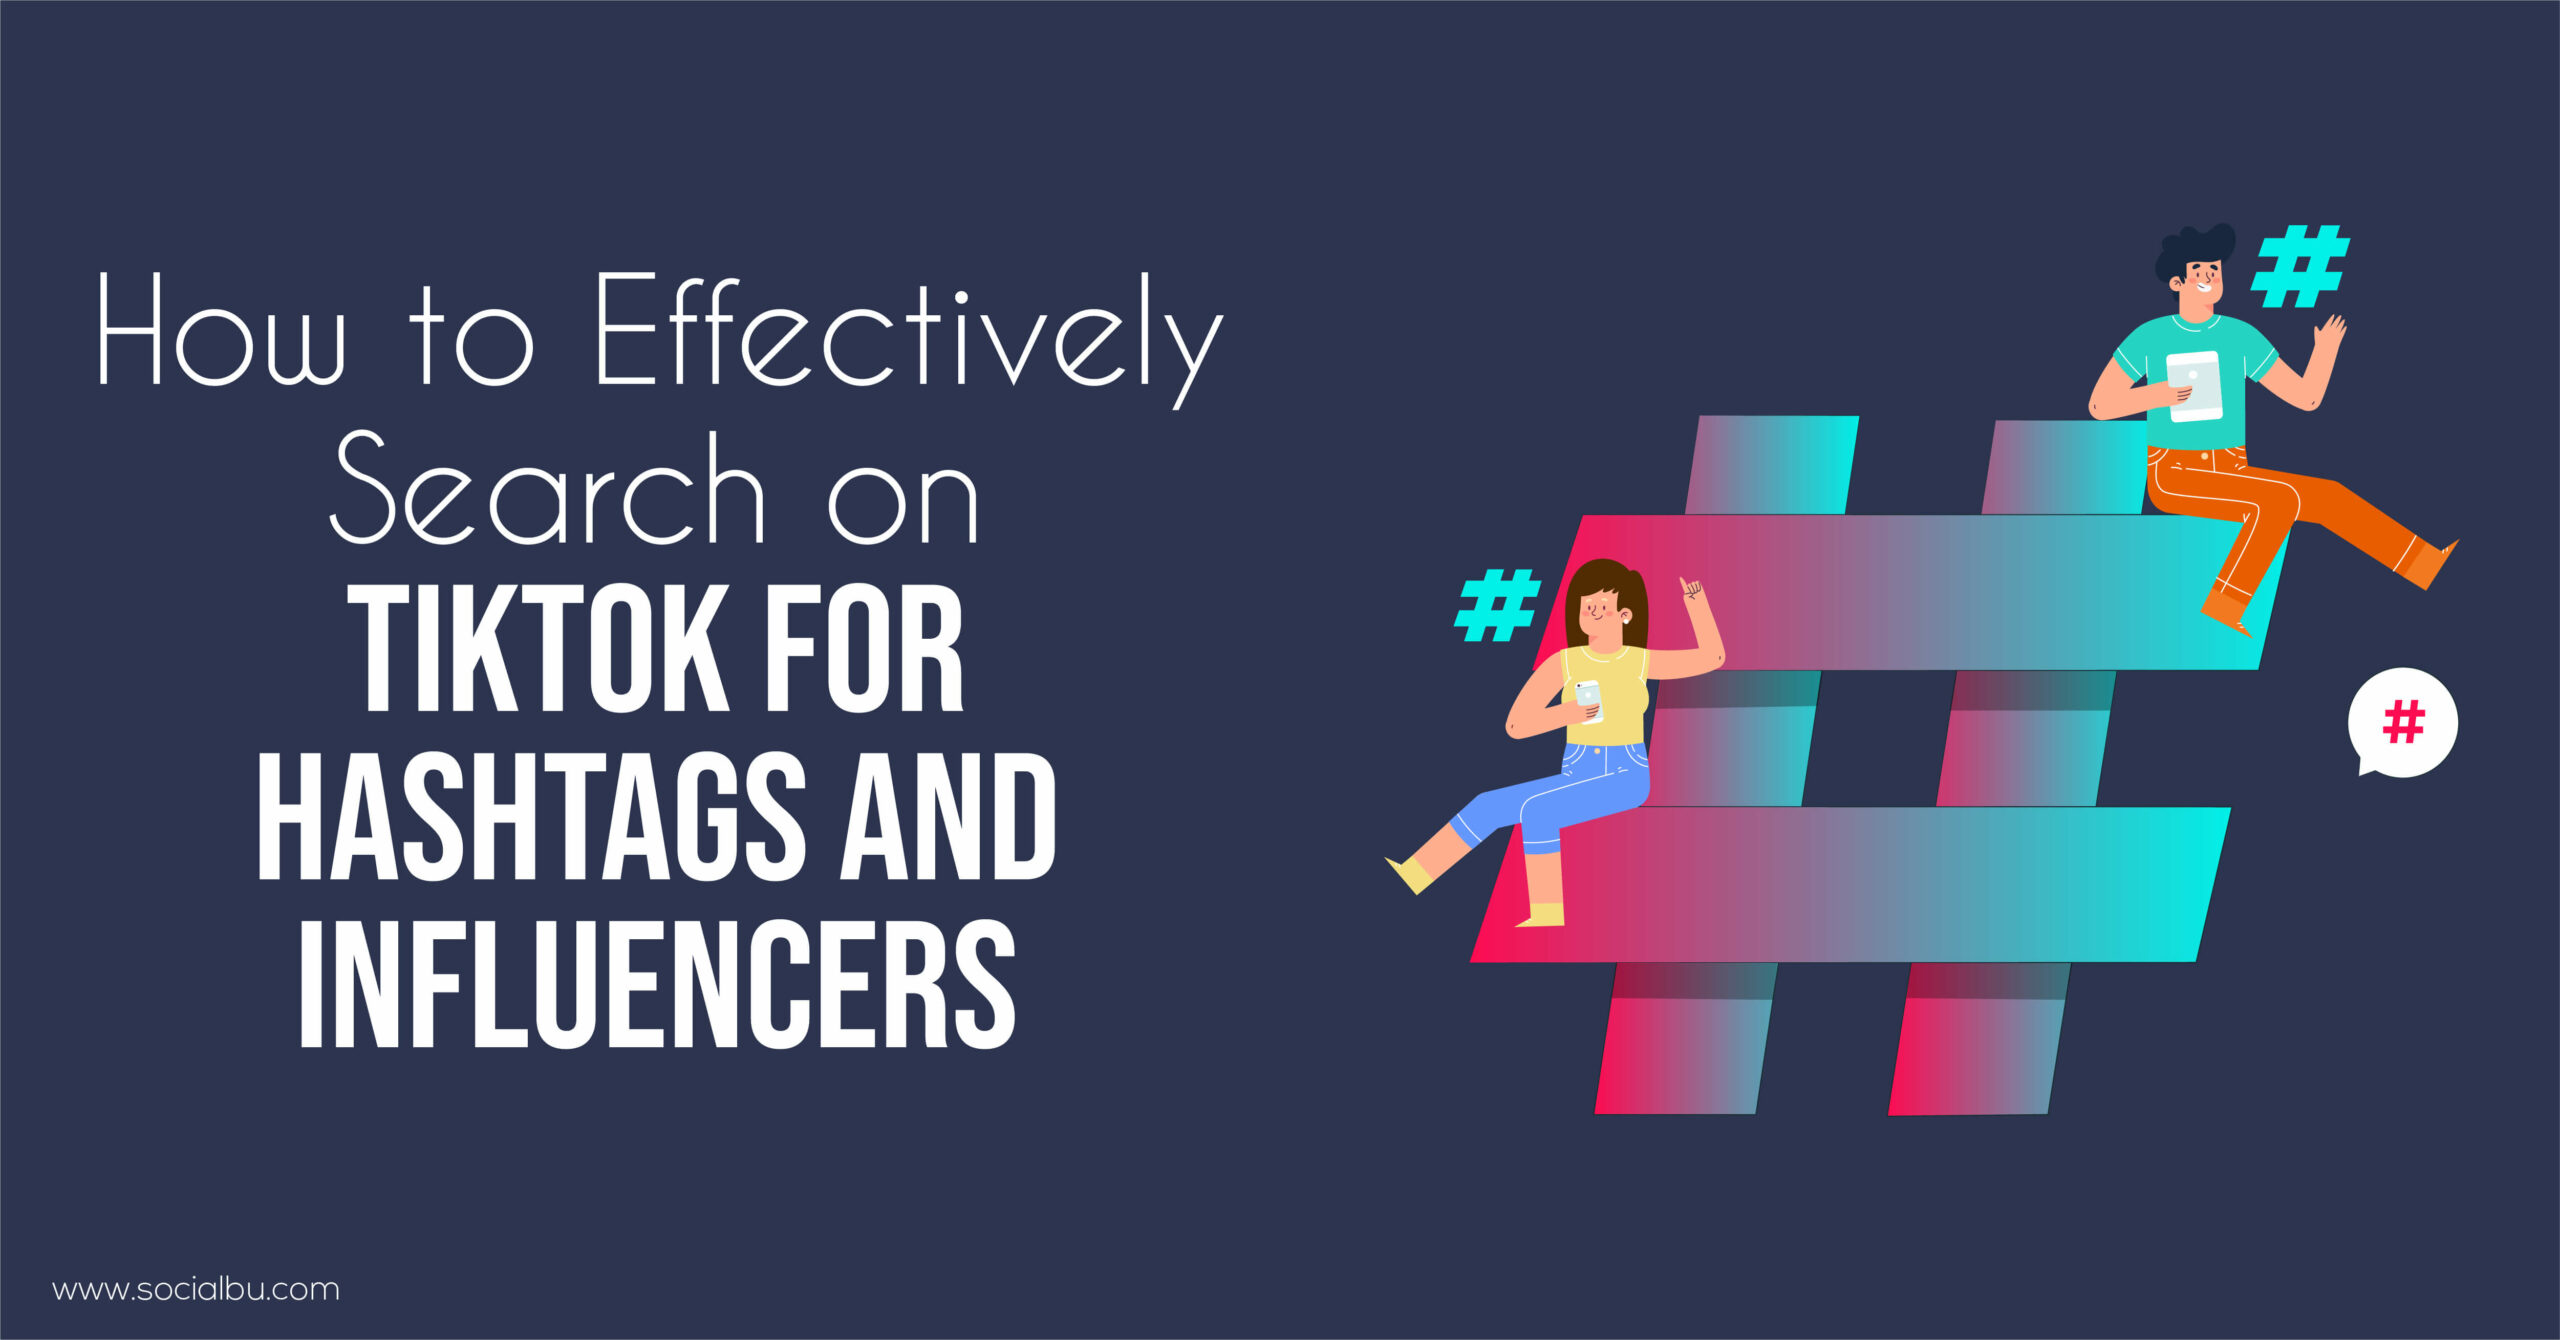 search hashtags and influencers on TikTok